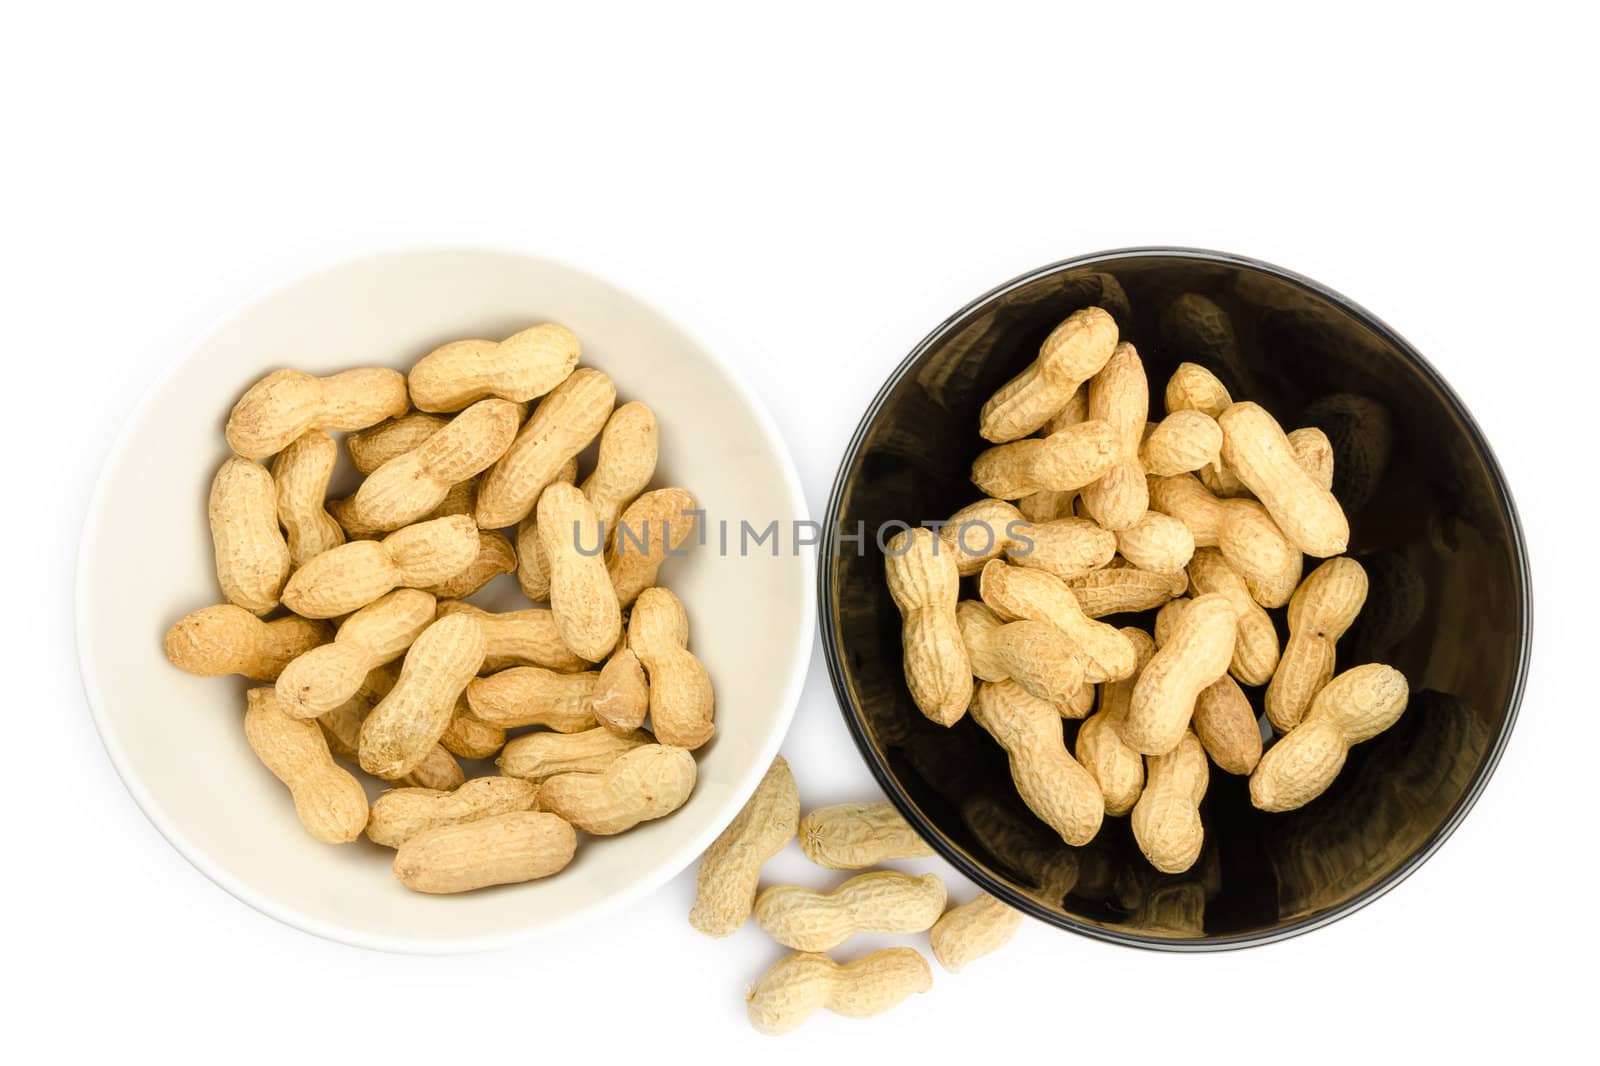 Black and white bowls full of peanuts on a white background by velislava